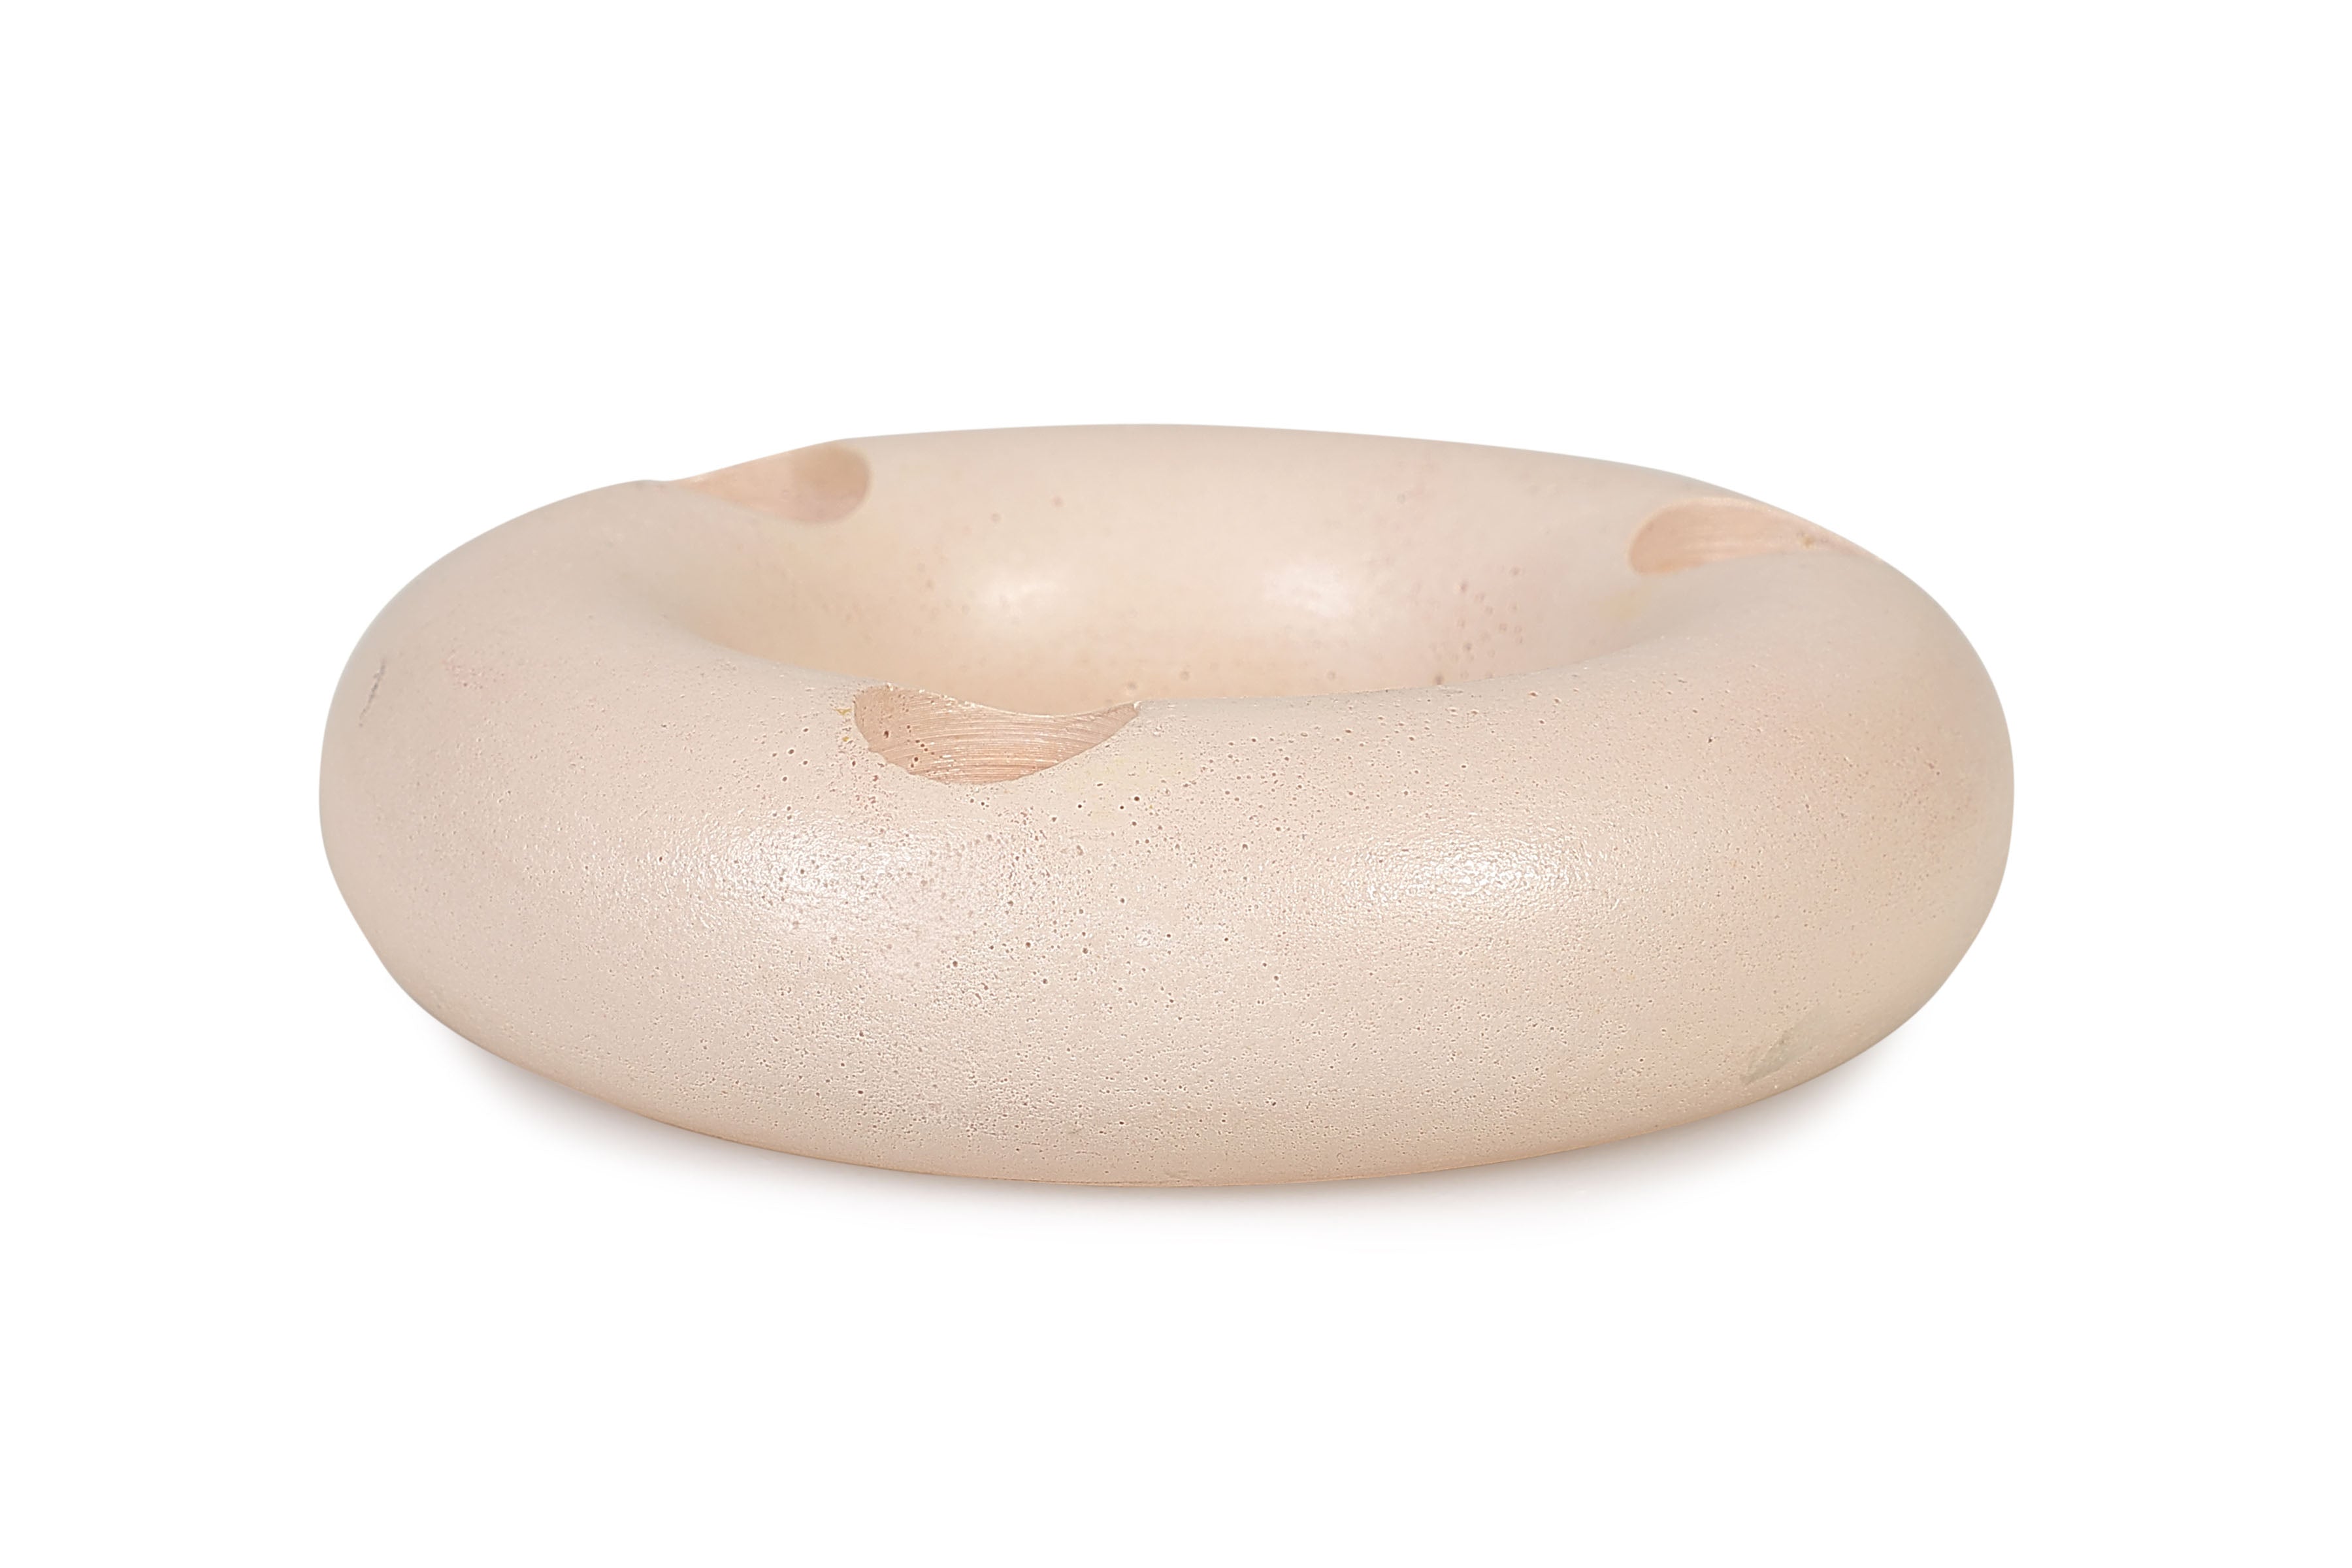 Nordic Donut Style Concrete Candle Holder - Blush (Set of 2)